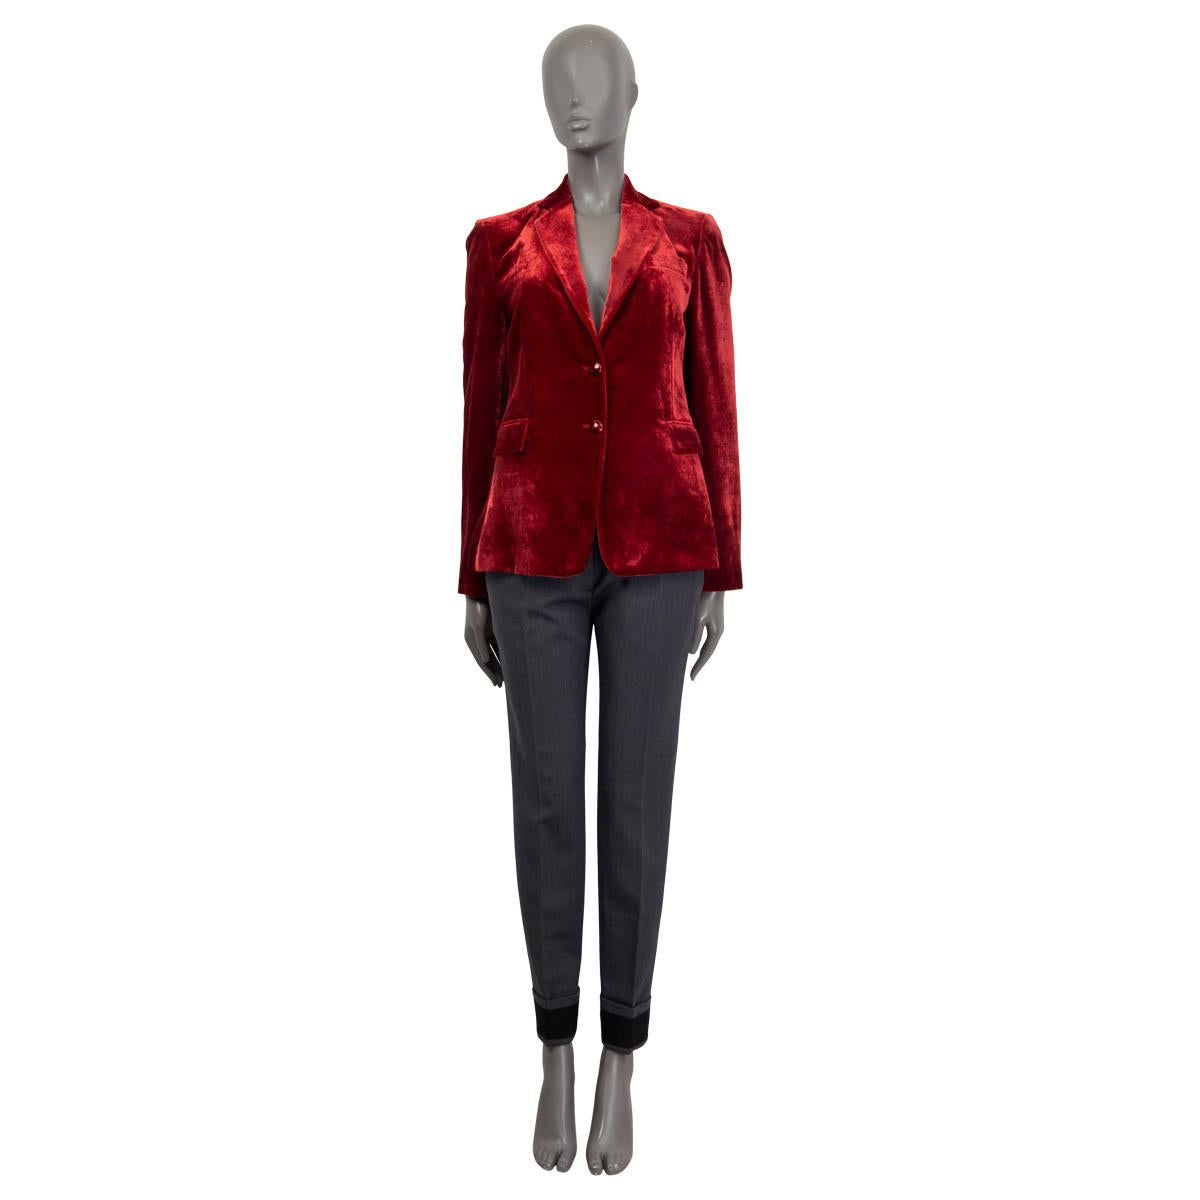 100% authentic Etro soft velvet blazer in red viscose (82%) and silk (18%). Features two sewn shut flap pockets on the front and one chest pocket. Has buttoned cuffs and a slit on the back. Opens with two buttons on the front. Lined in multicolored